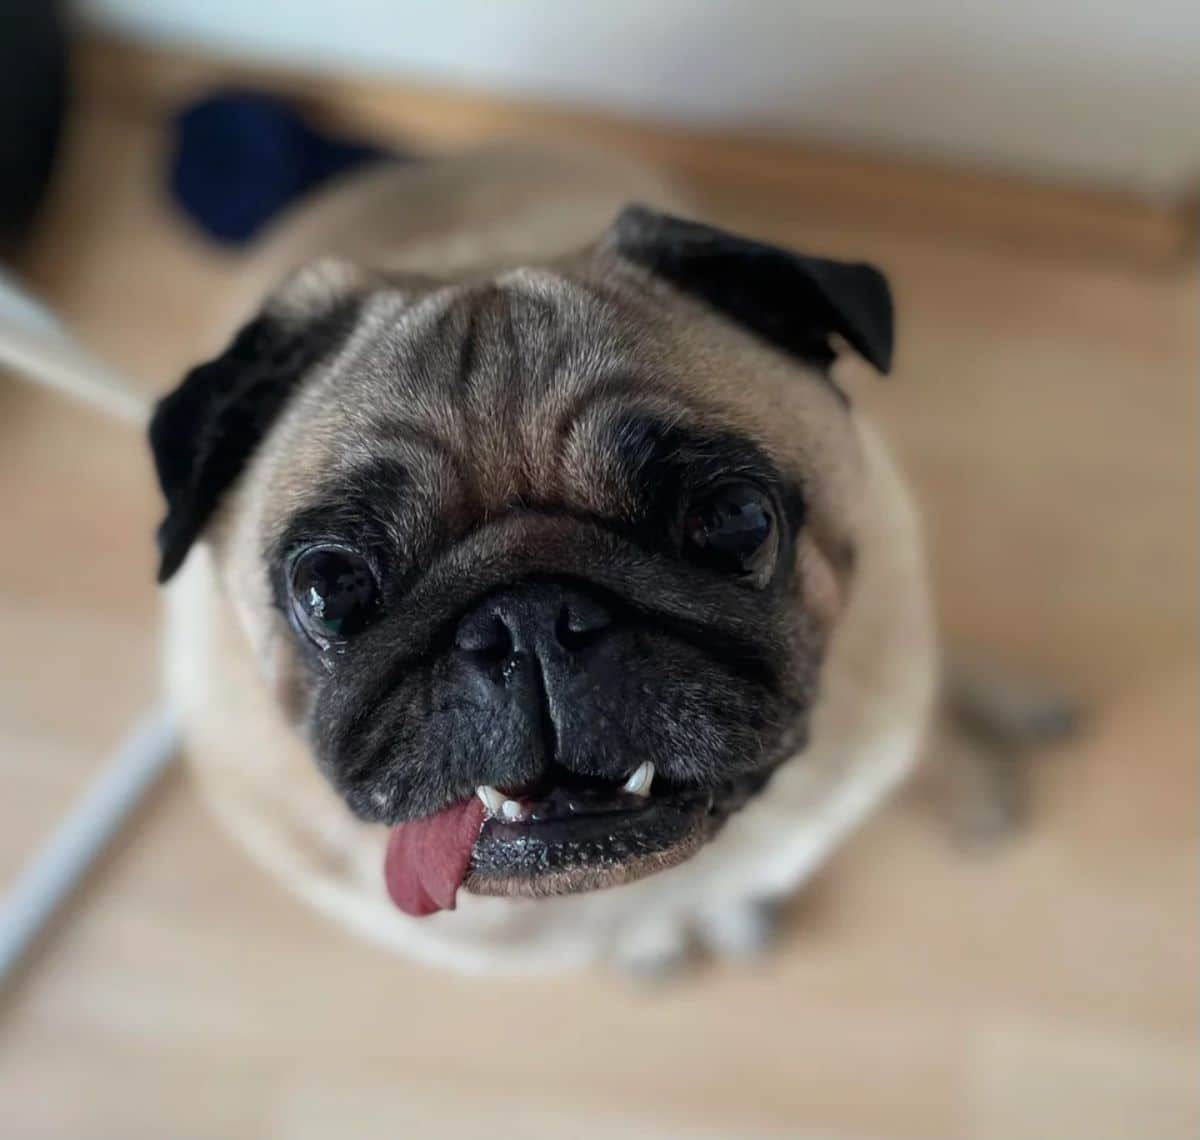 brown pug looking up with the tongue sticking out slightly and 3 teeth showing